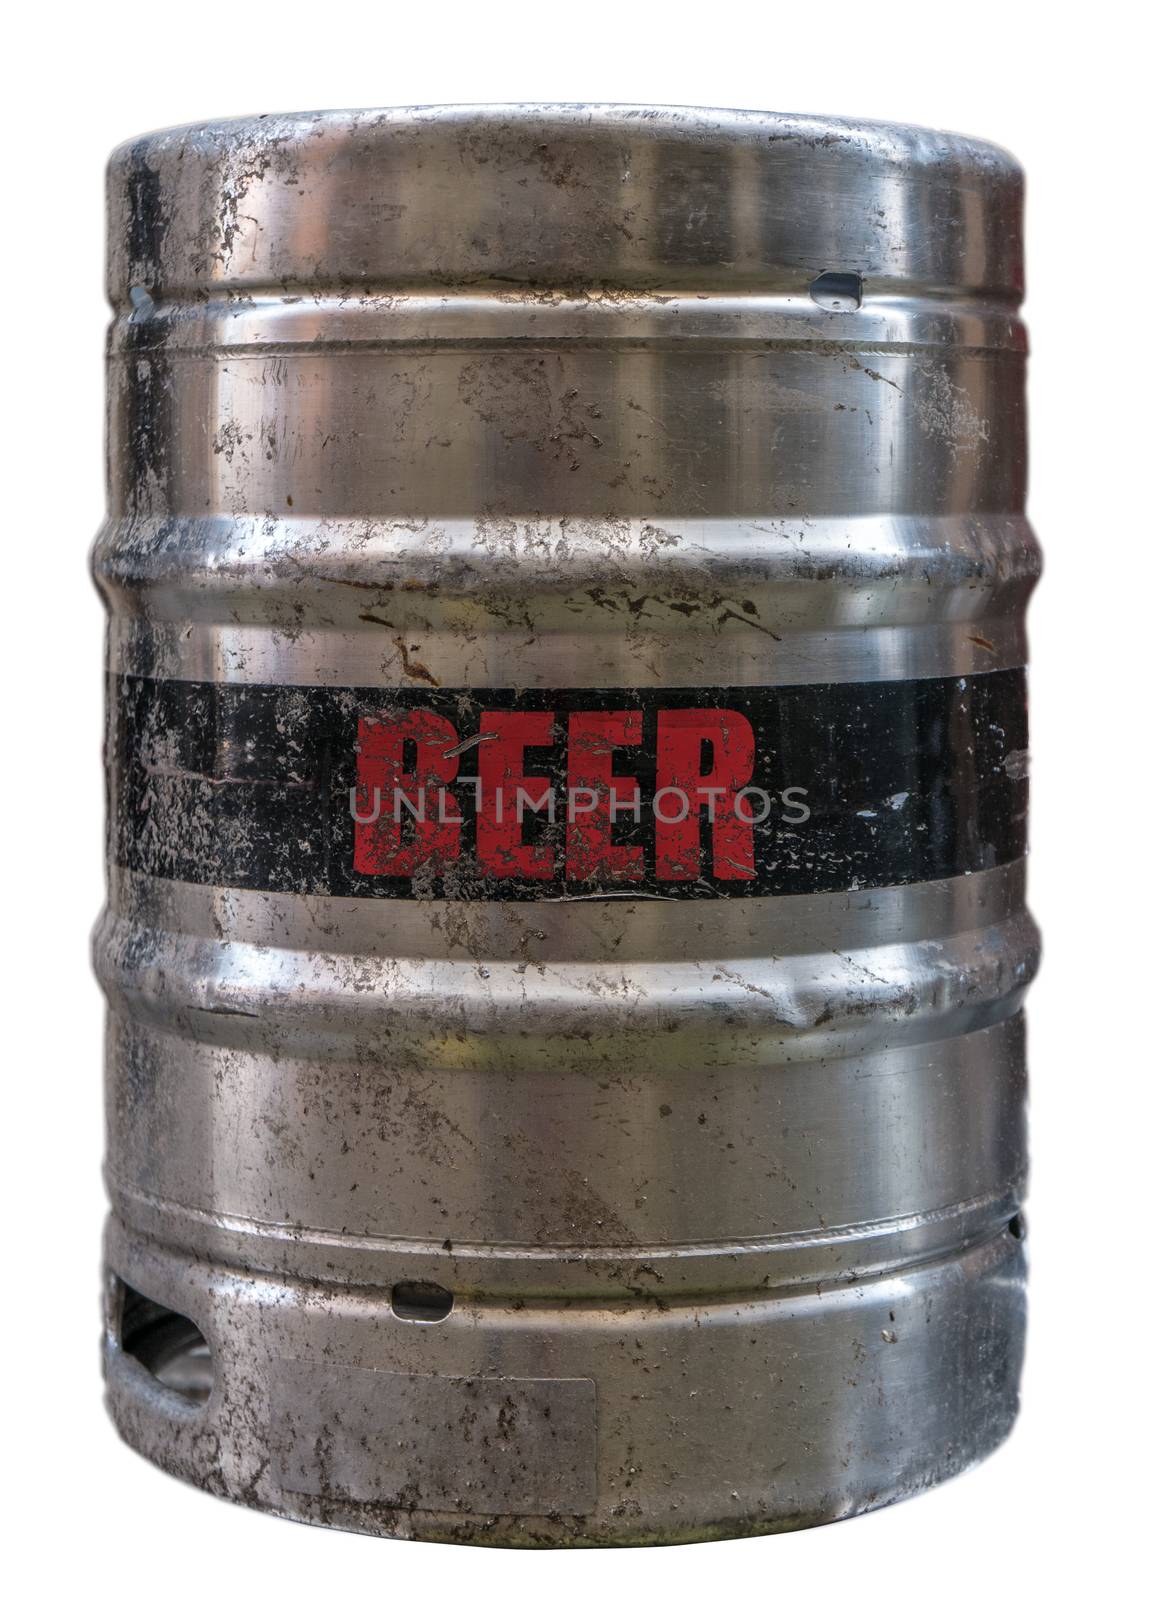 Isolated Grungy Metal Beer Keg Or Cask Or Barrel